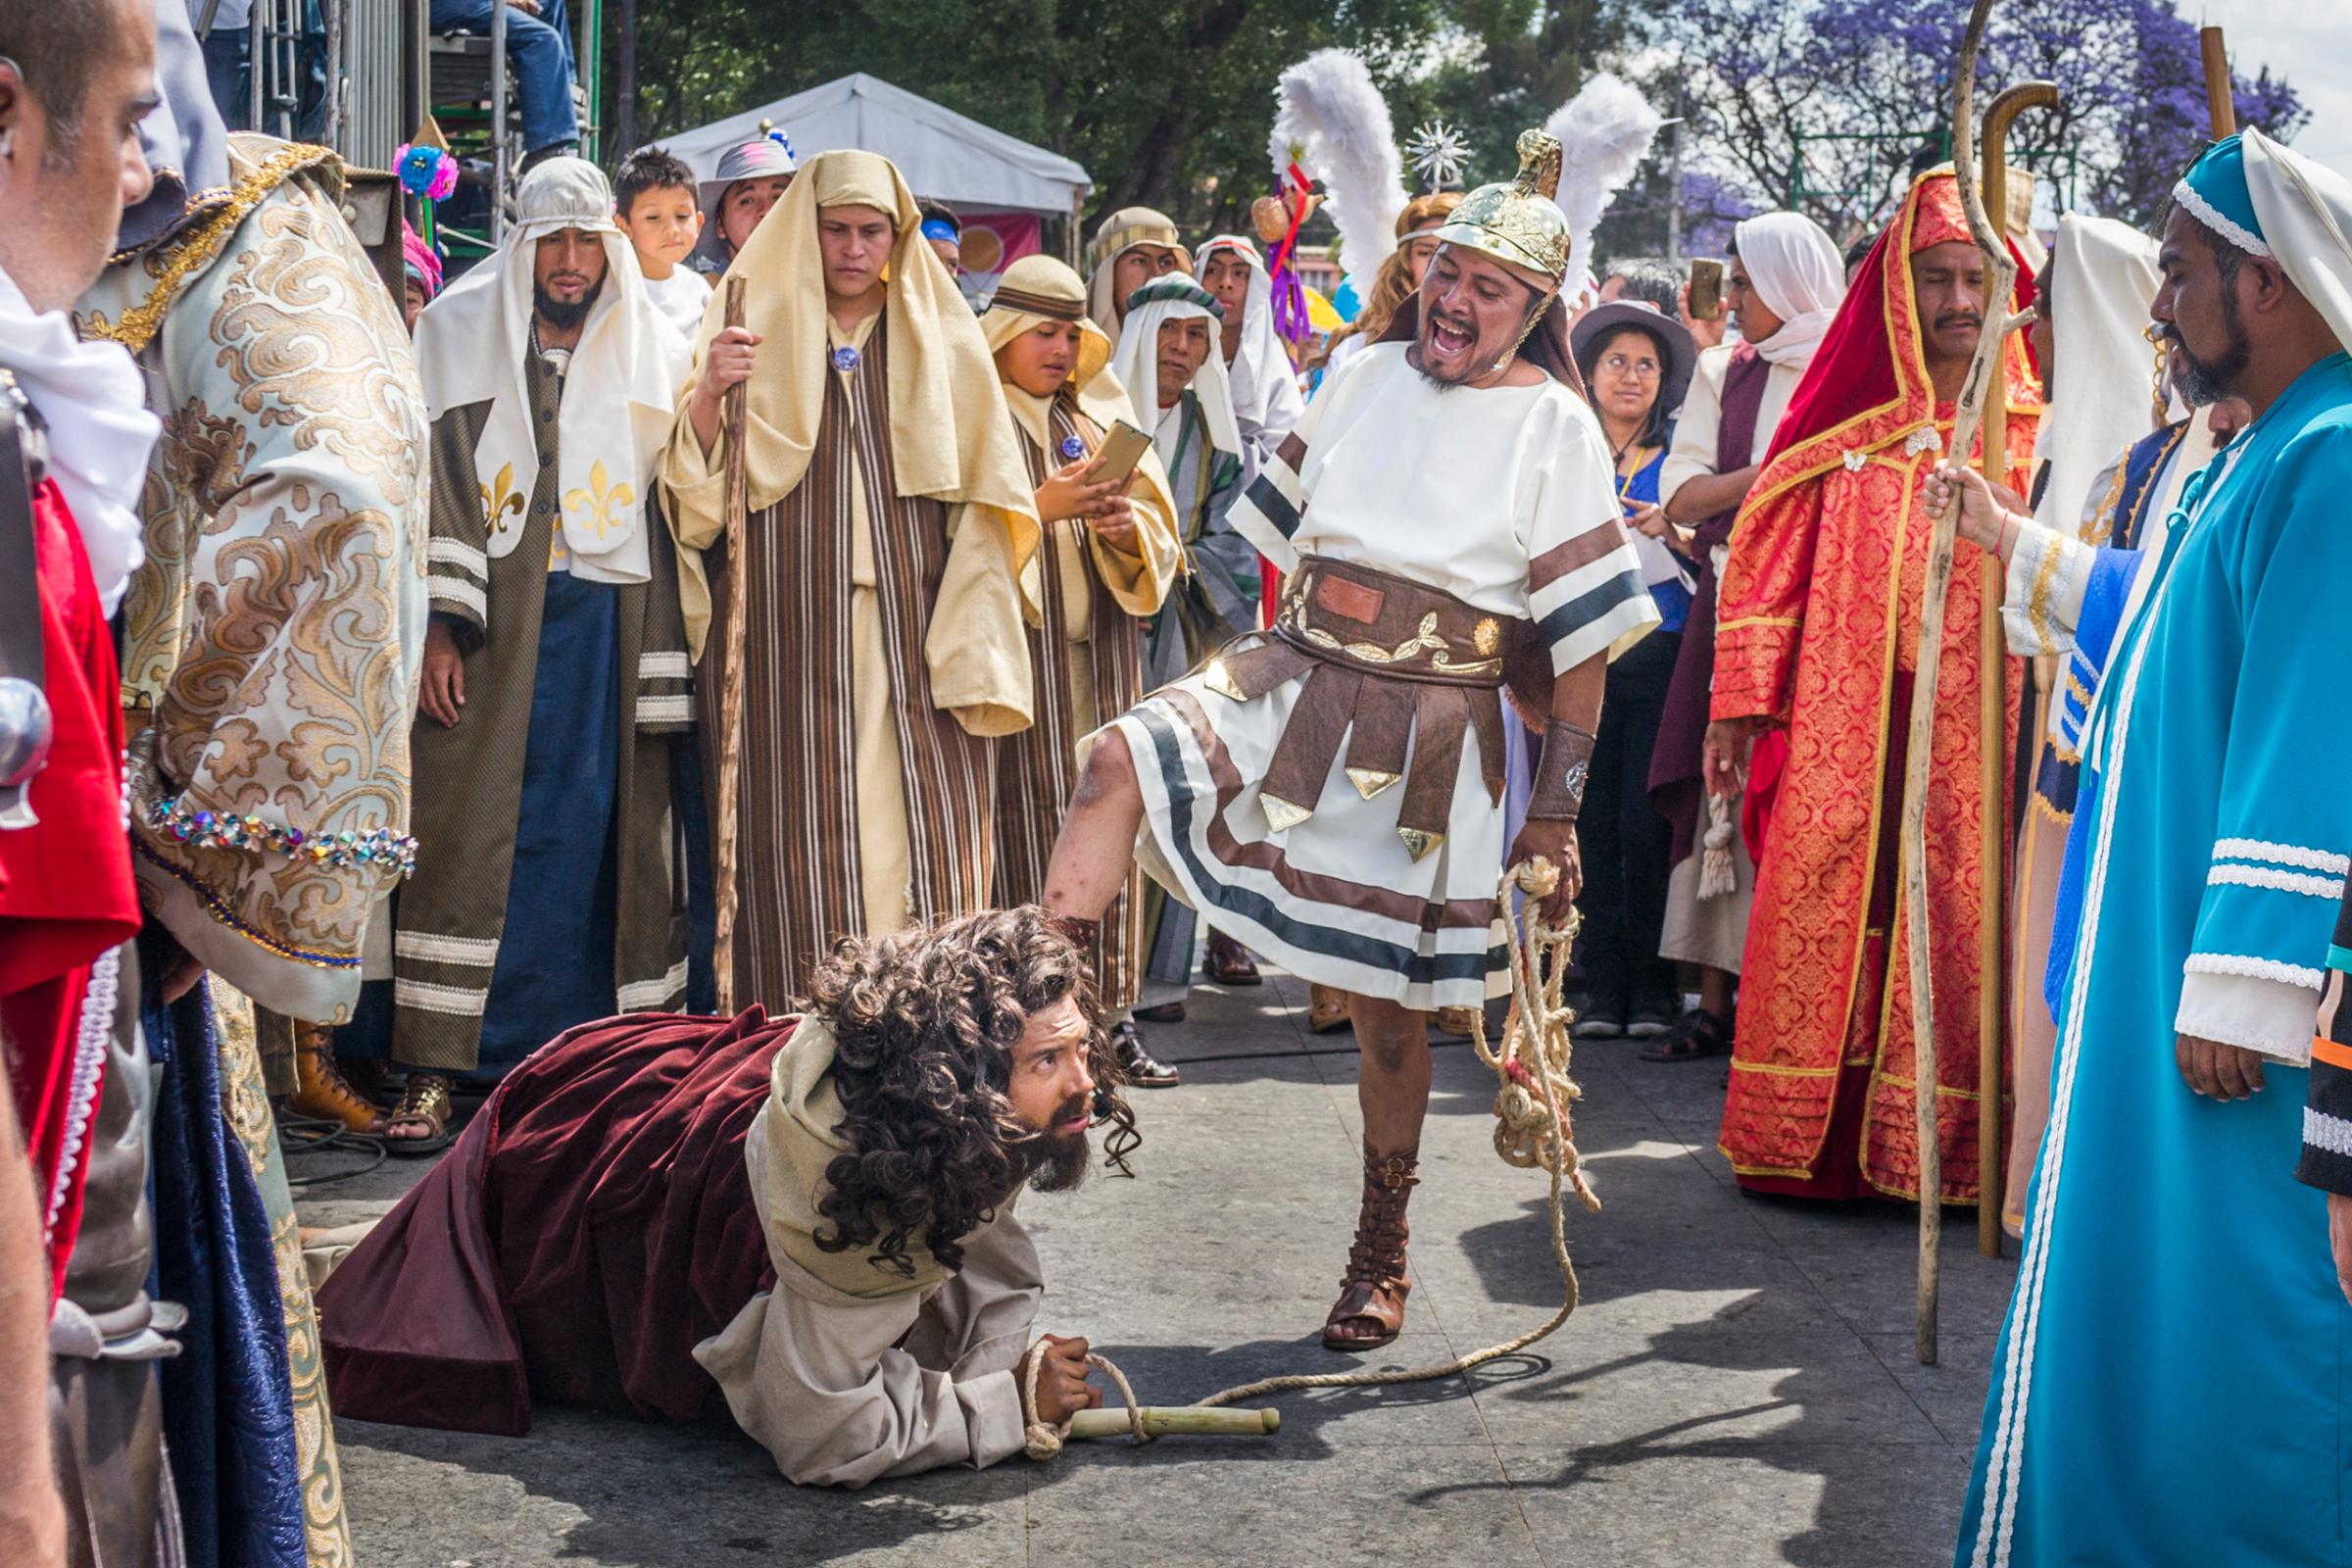 A reenactment of the stations of the cross depicting the passion of Jesus Christ during Holy Week celebrations in Iztapalapa, Mexico.